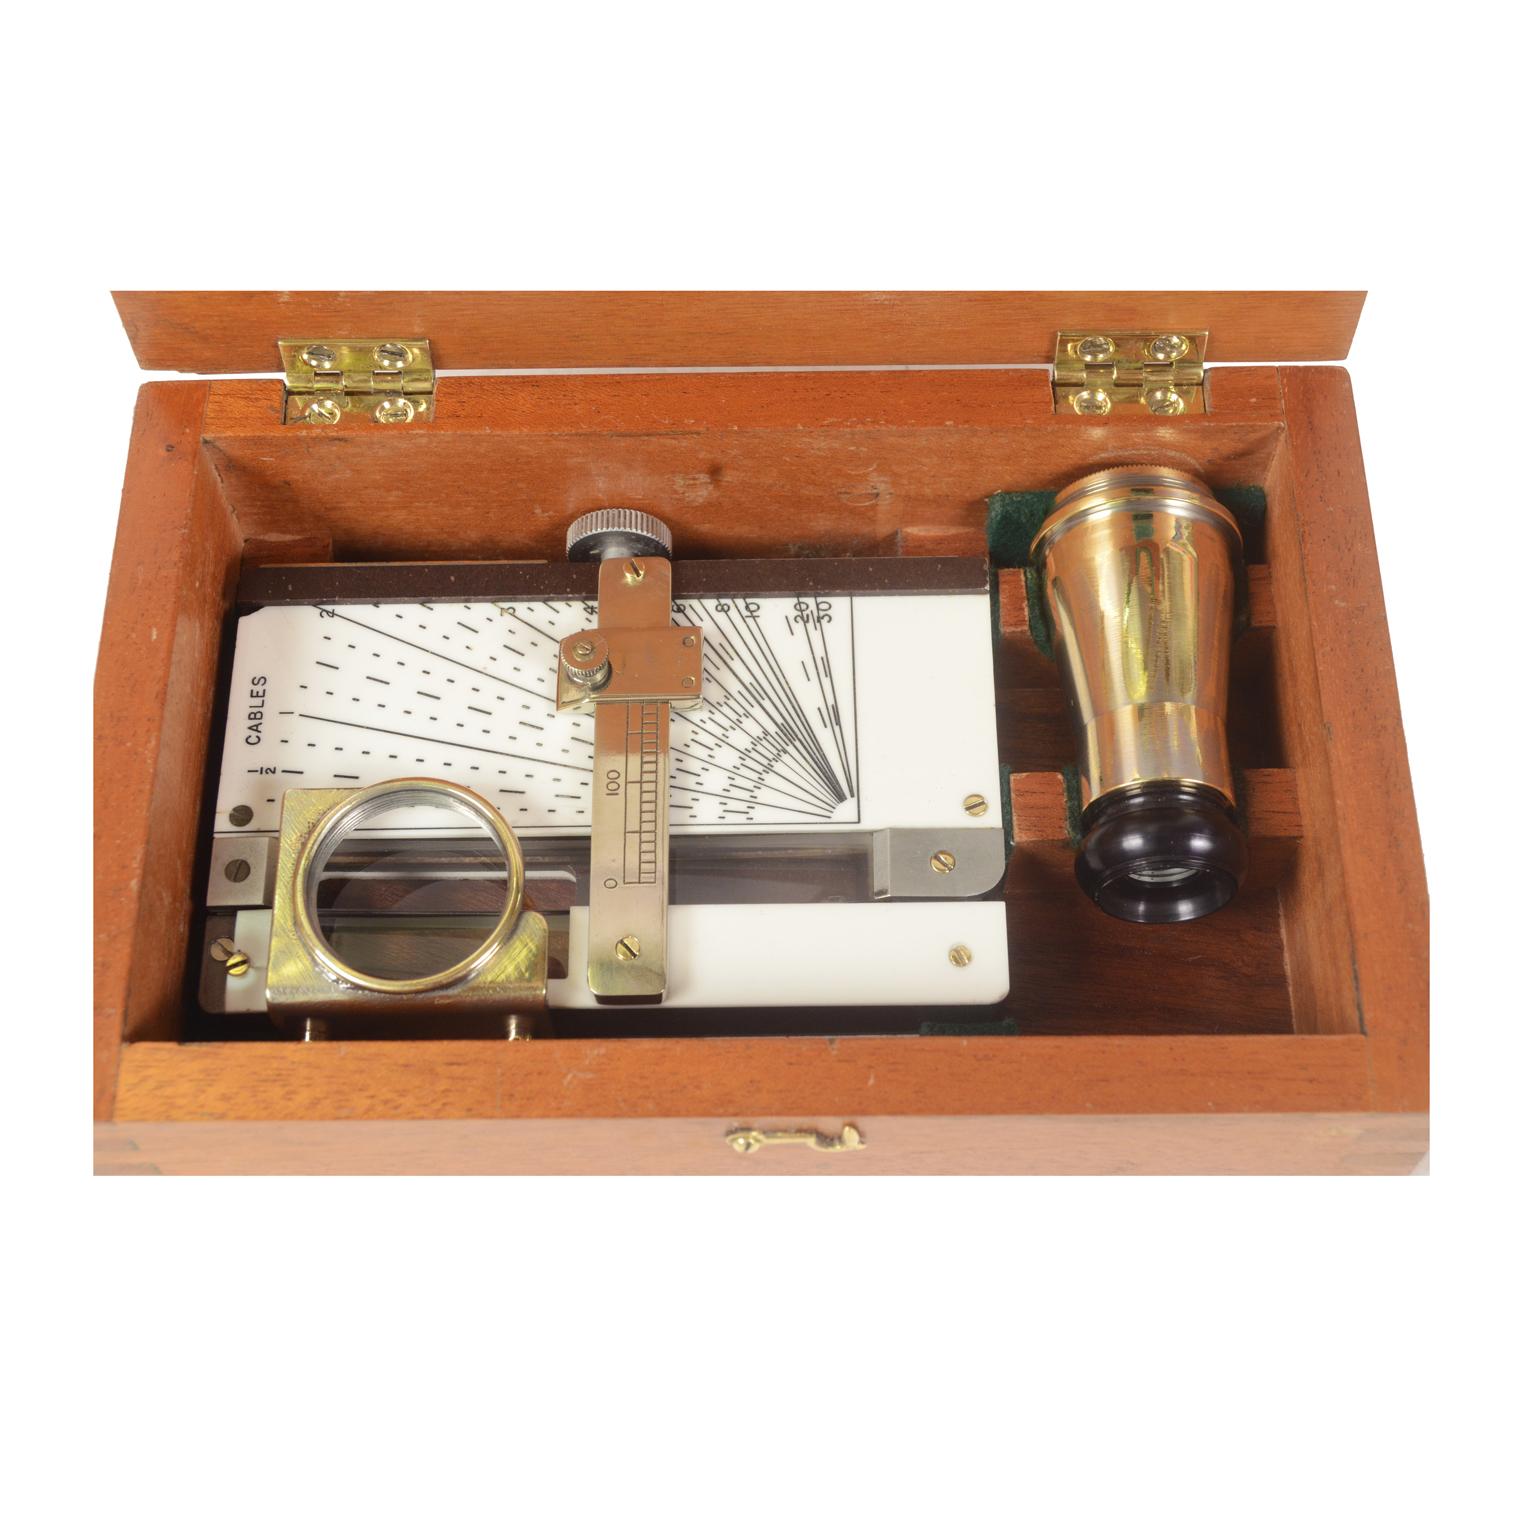 Nautical rangefinder signed Made in Great Britan by Kelvin Hughes a divison of Smiths Industries Limited made in the 1960s, complete with original mahogany box. AP 498 Stuats Marine Distance Meter very good working condition. Box size cm 21 x 13 H